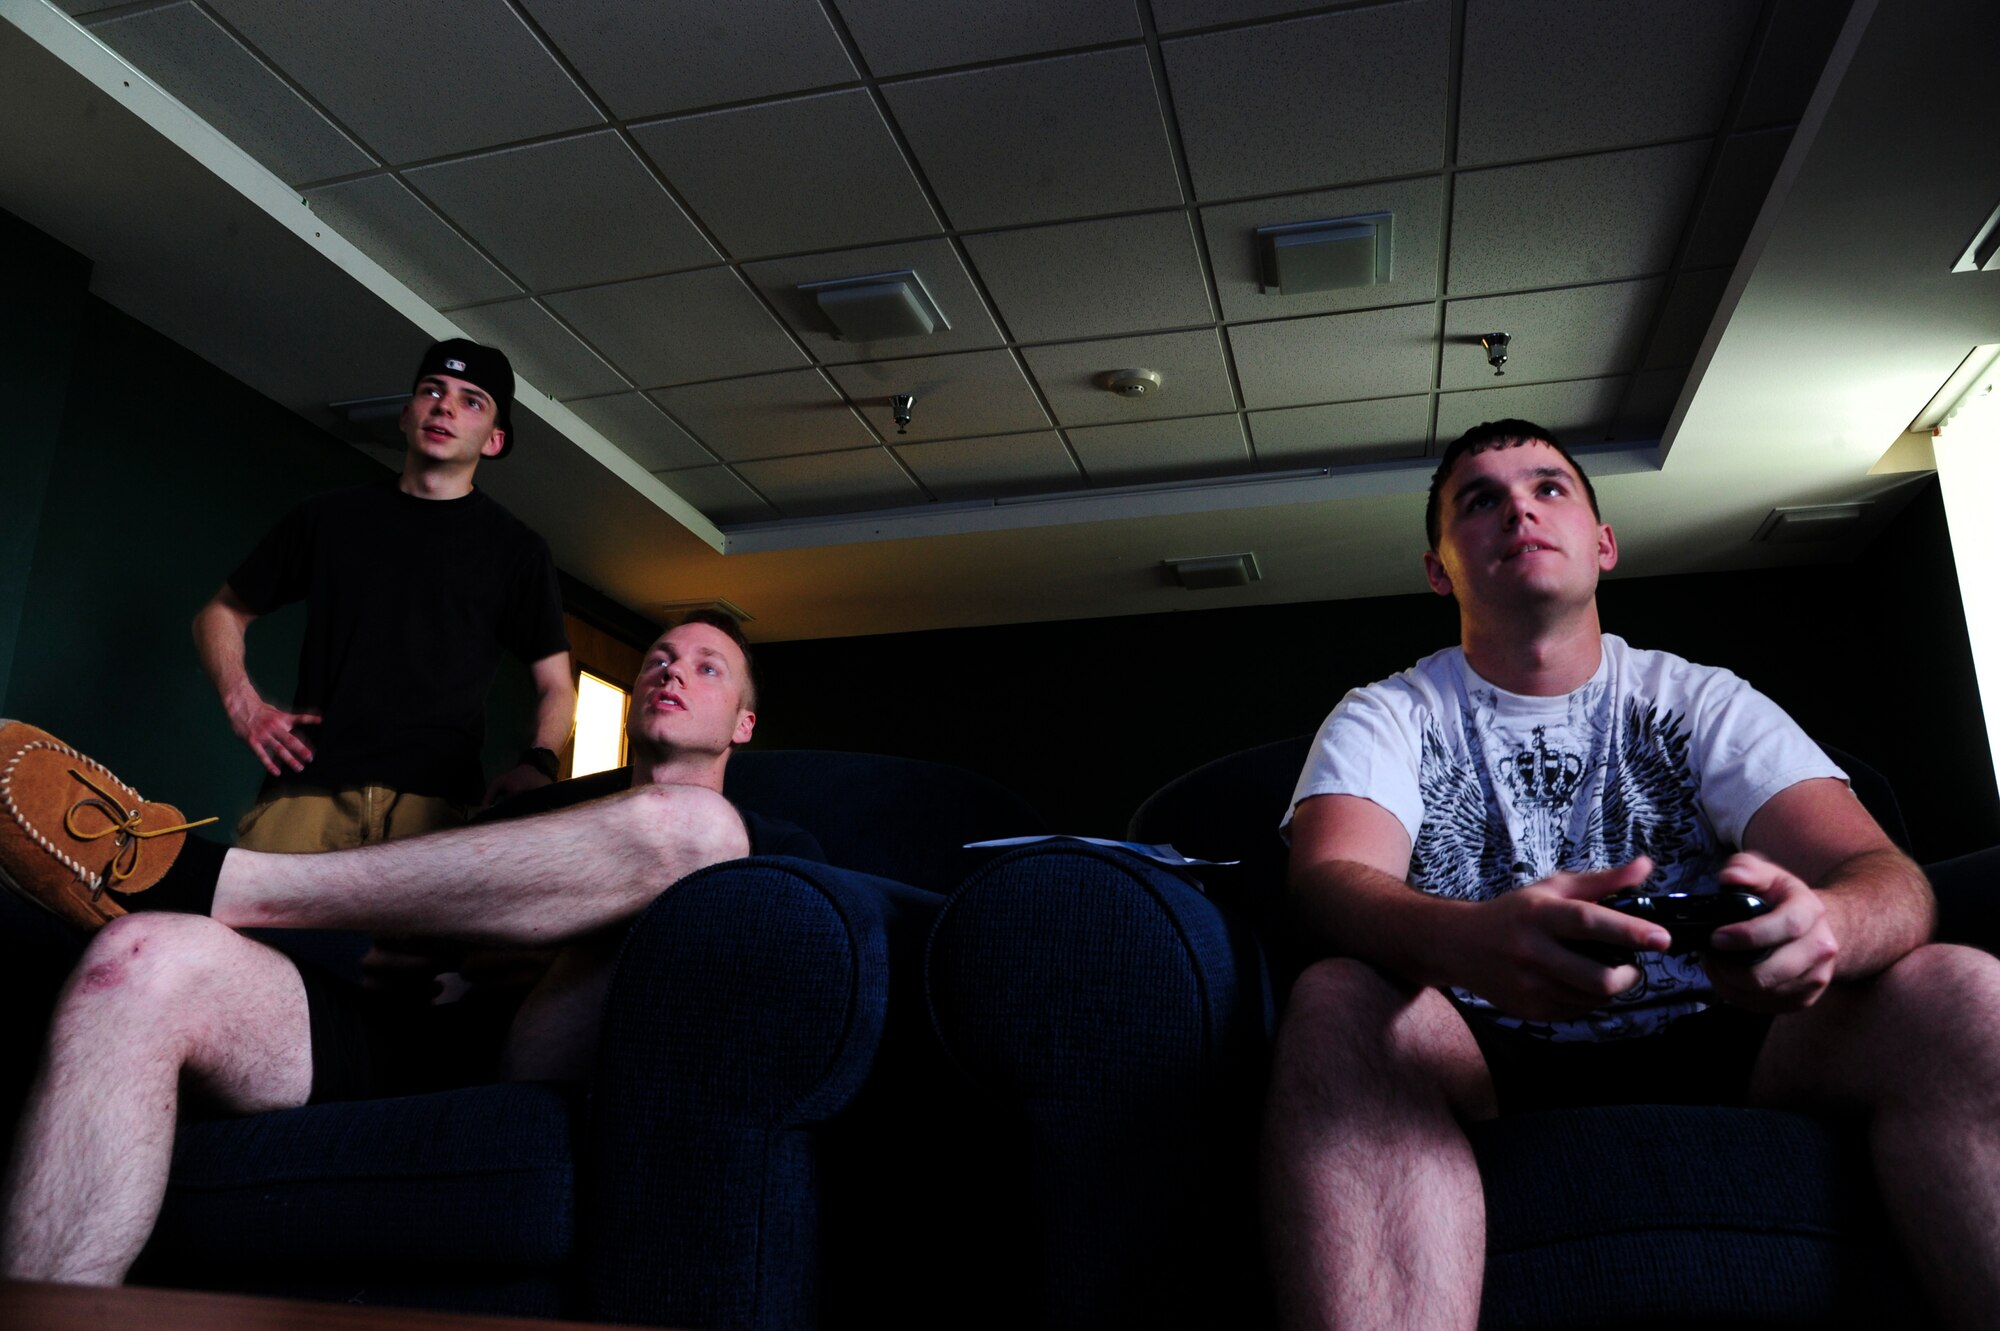 Airman John Greenberg, 319th Logistics Readiness Squadron vehicle operator apprentice, left, Airman 1st Class Scott Mattes, 69th Maintenance Squadron ground systems technician, middle, and Airman 1st Class Jeremy Kvigne, 69th MXS ground systems technician, concentrate during a round of Call of Duty: Advanced Warfare May 28, 2015 in the dormitory dayroom on Grand Forks Air Force Base, N.D. Gaming has become a popular way for Airmen to connect outside of duty hours. (U.S. Air Force photo by Airman 1st Class Ryan Sparks/released)